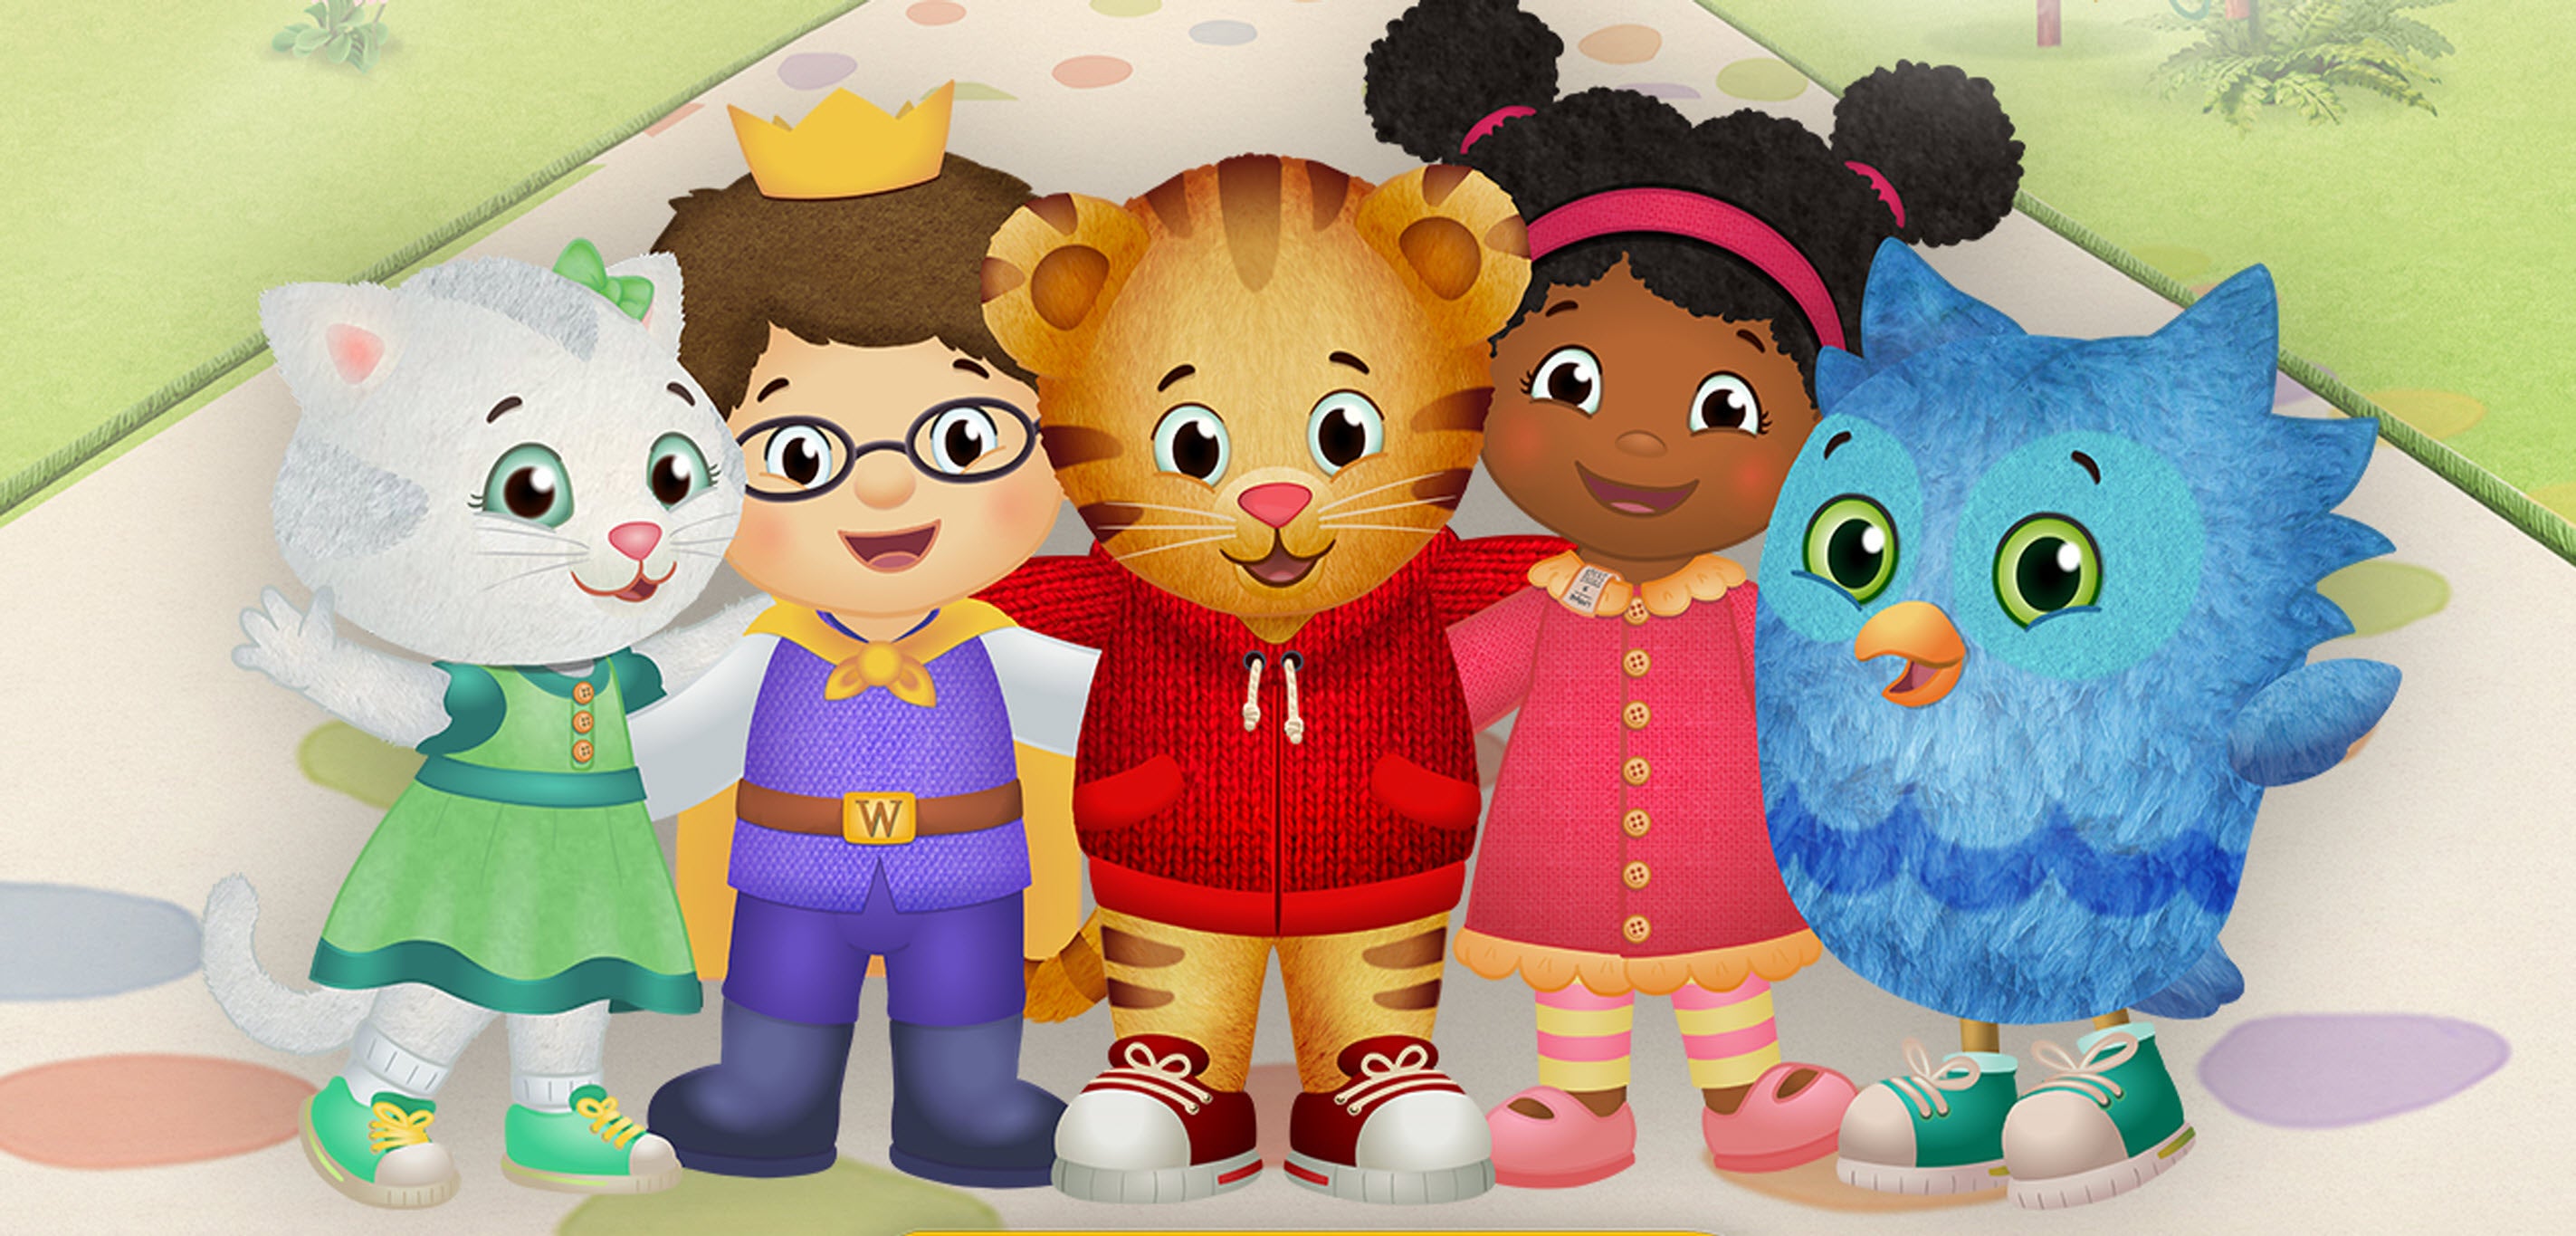 Daniel Tiger's Neighborhood Live!: King For A Day in Oakland promo photo for Venue presale offer code